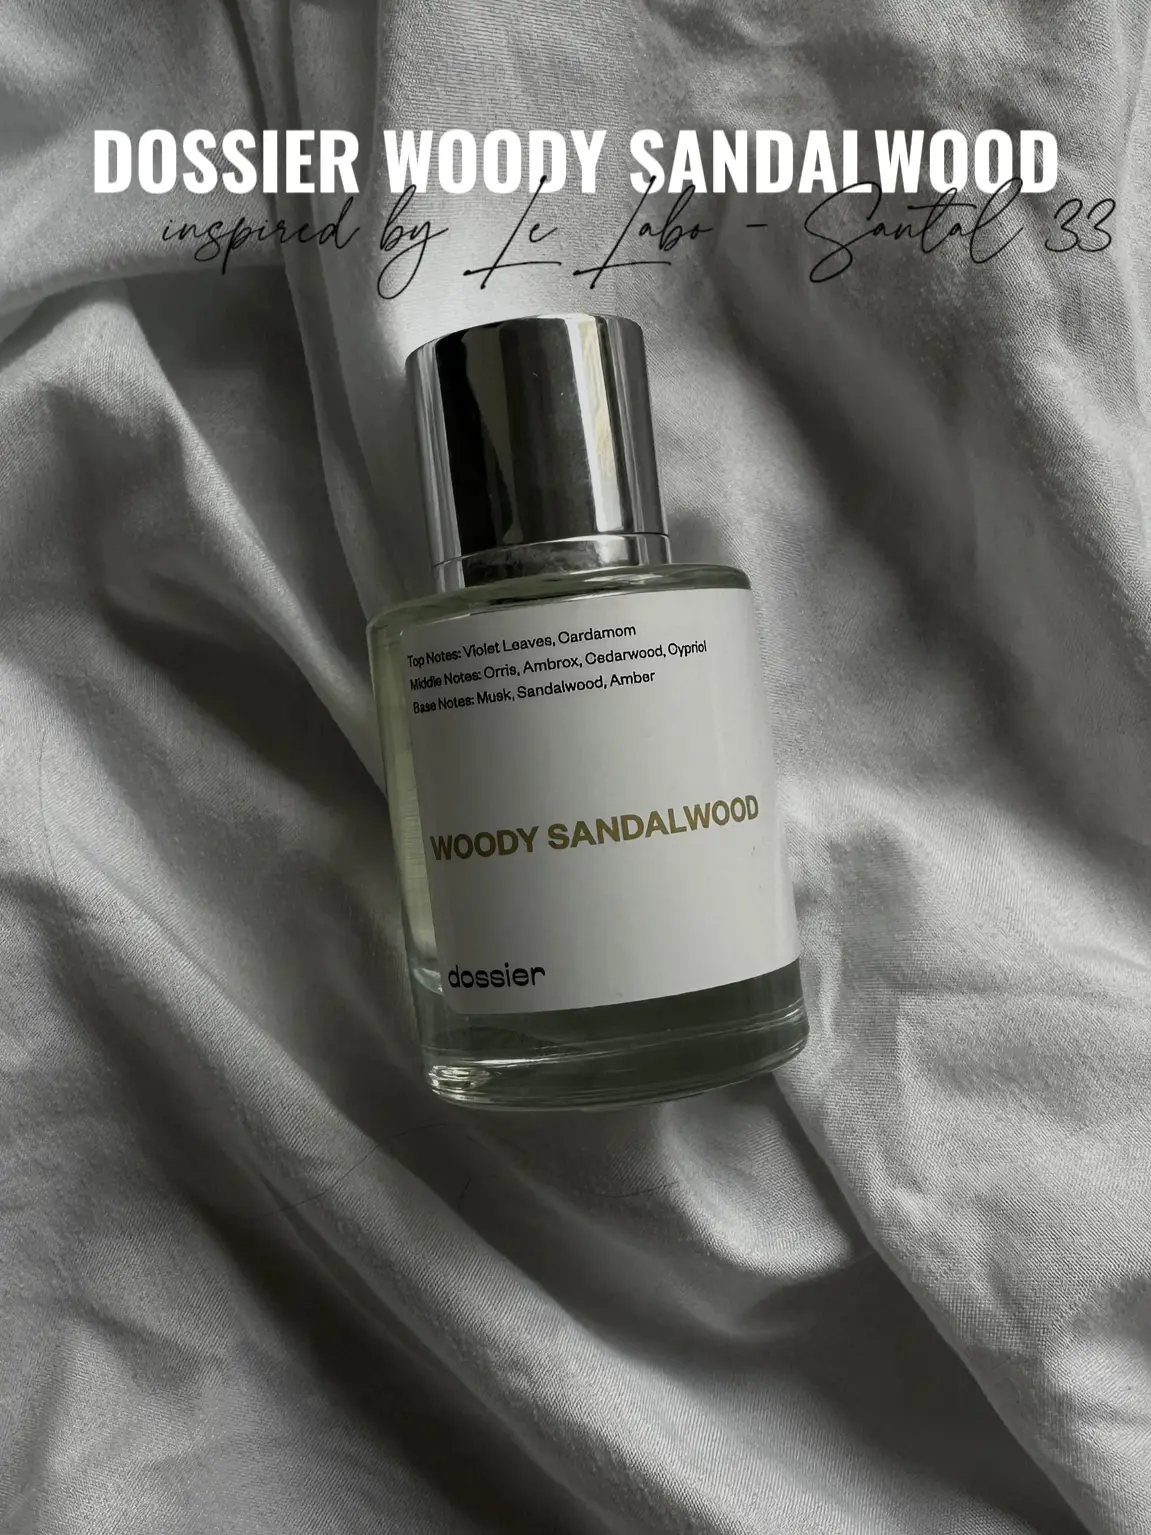 DOSSIER WOODY SANDALWOOD PERFUME REVIEW, Gallery posted by jenny